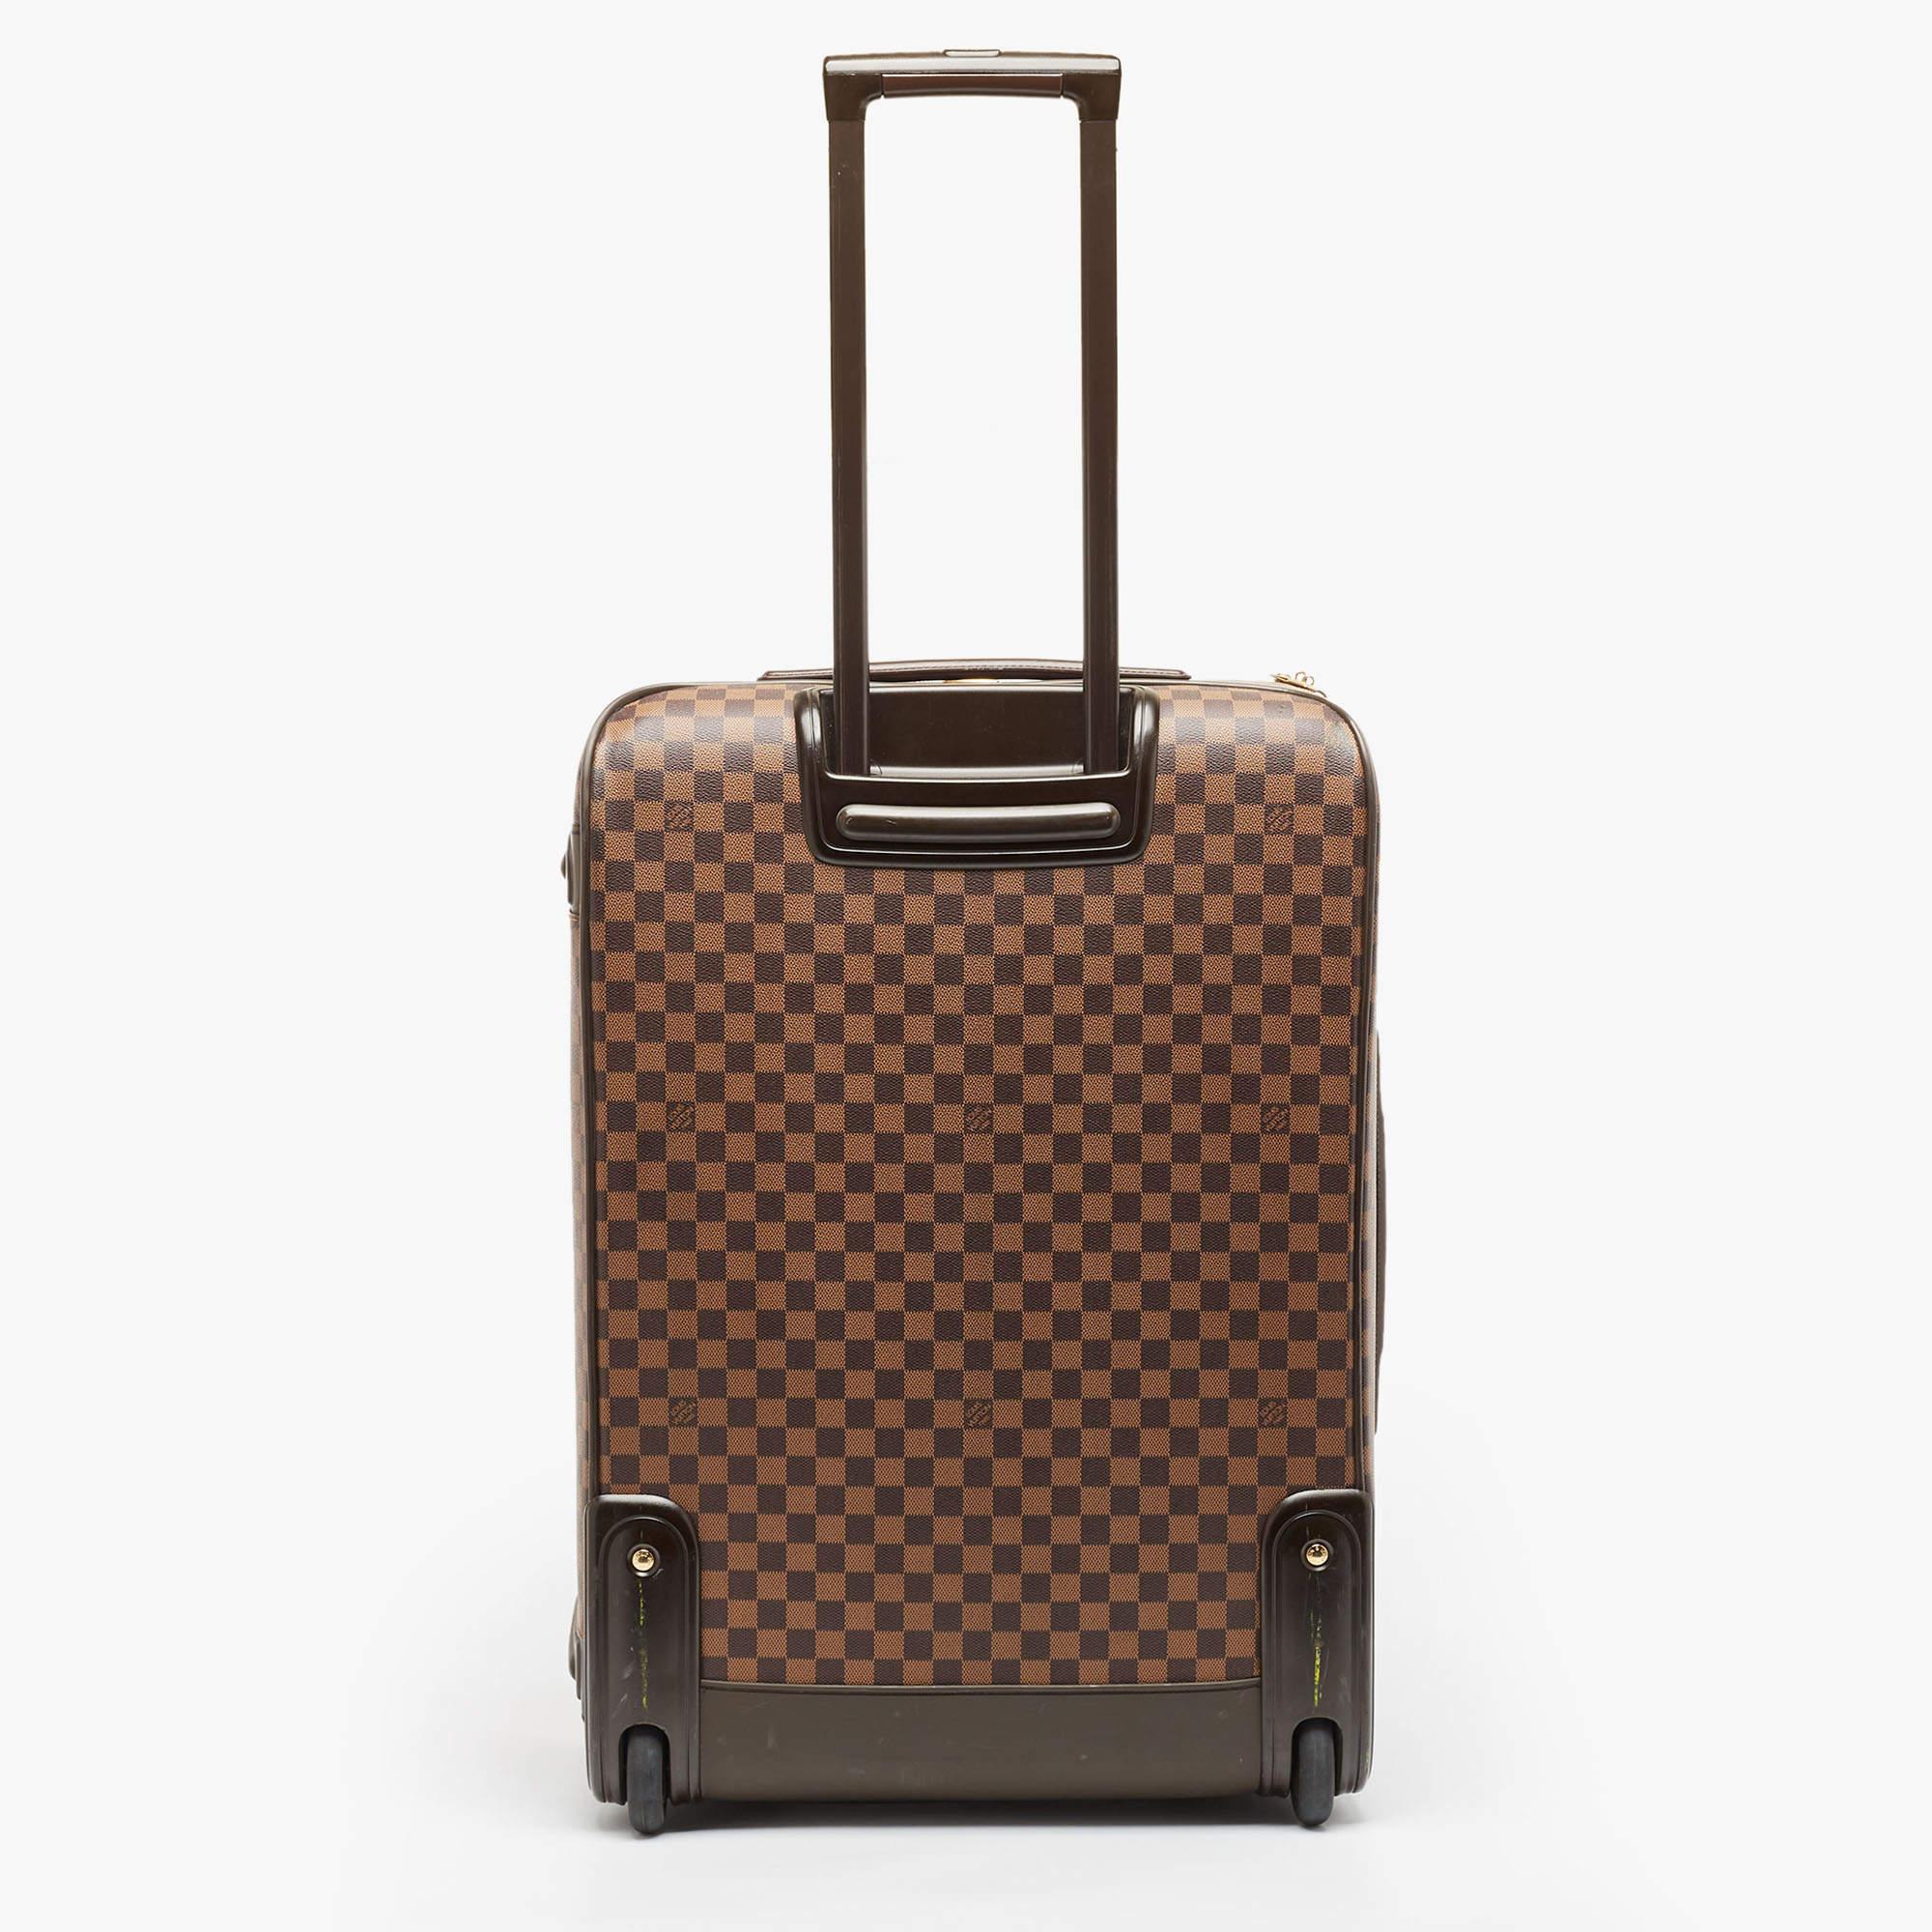 Louis Vuitton's bags are popular owing to their high style and functionality. This travel luggage bag, like all their designs, is durable and stylish. Exuding a fine finish, it is designed to give a luxurious experience.

Includes: Original Dustbag,